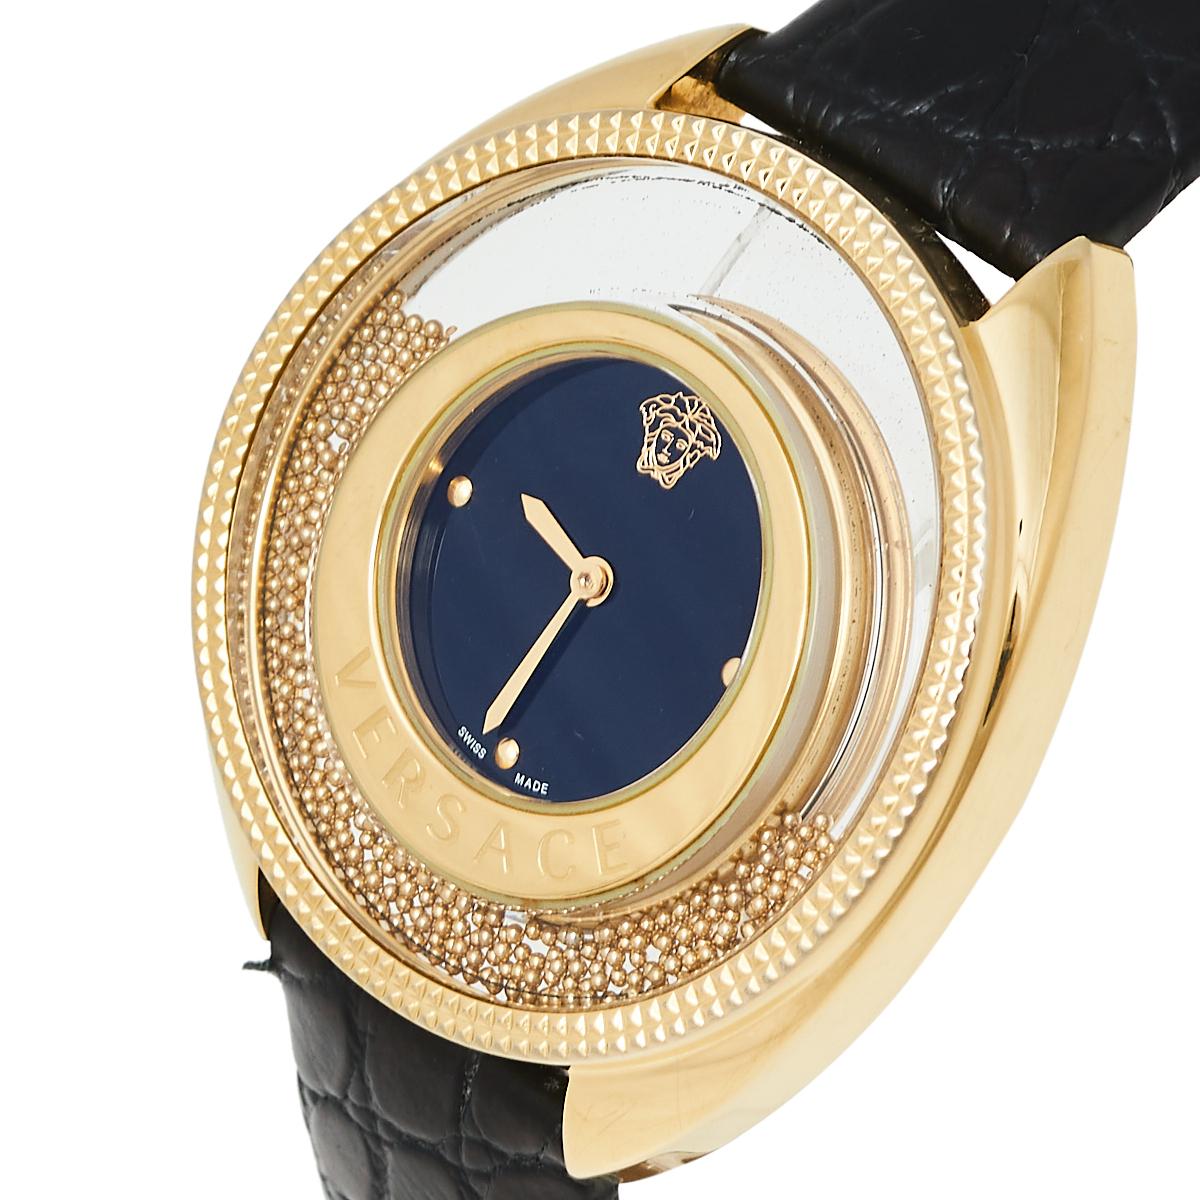 This beautiful timepiece from the house of Versace is sure to be a conversation starter with its eclectic and eye-catching design. Constructed using gold-plated stainless steel, this Destiny Spirit watch features a transparent panel on the case